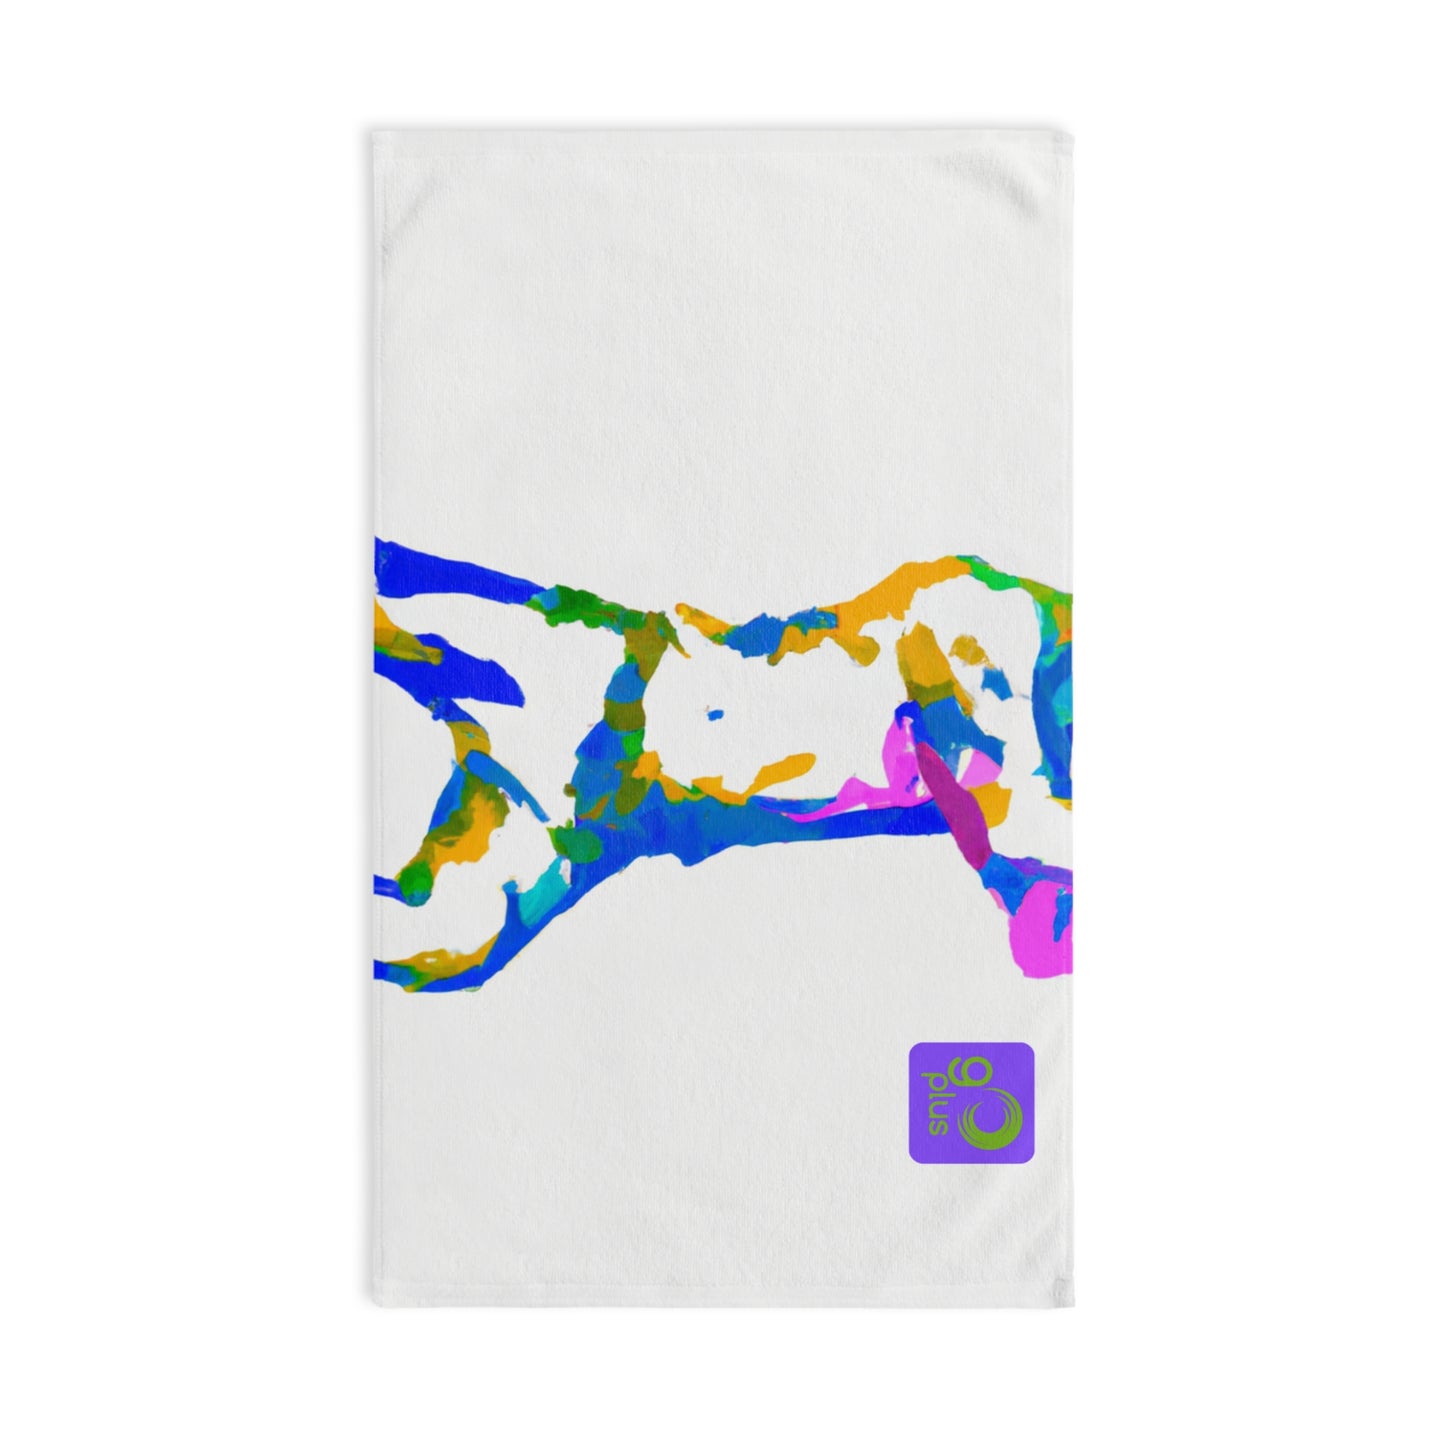 "The Grace of Motion: A Sport Inspired Exploration of Energy and Action" - Go Plus Hand towel